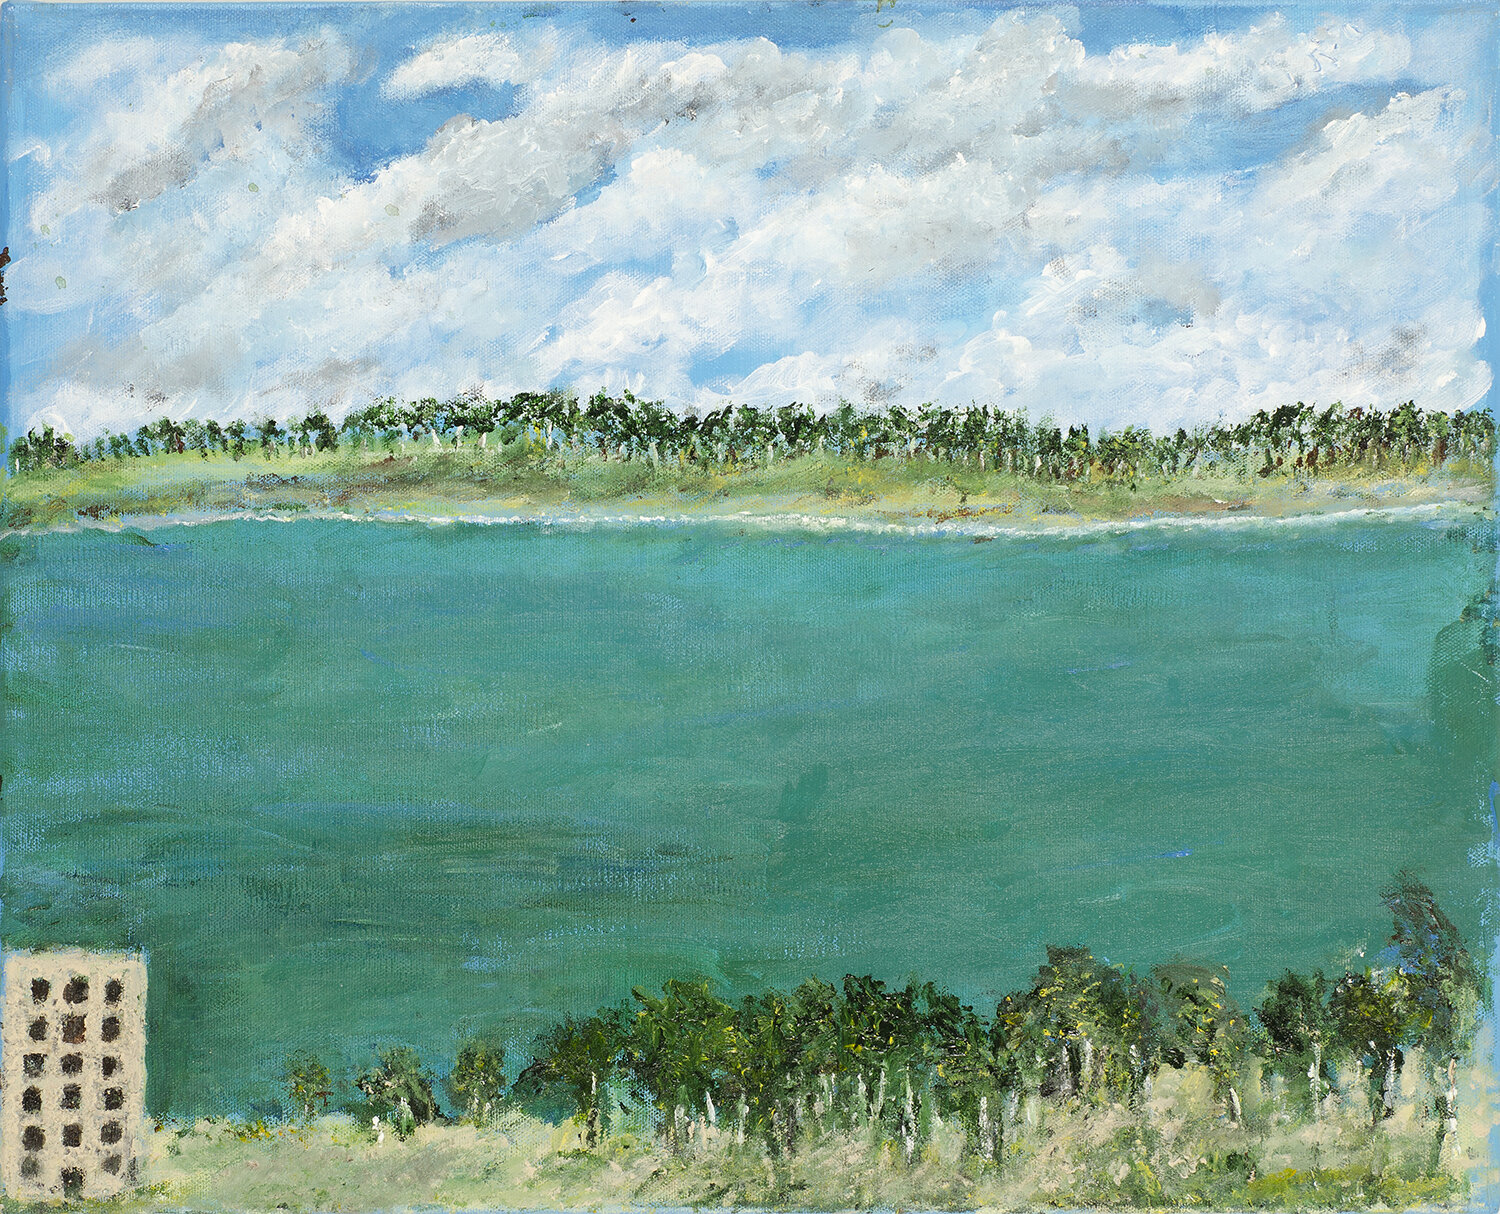 Andre Lanthier, Ocean Forest Blue Sky, 16x20, acrylic on canvas